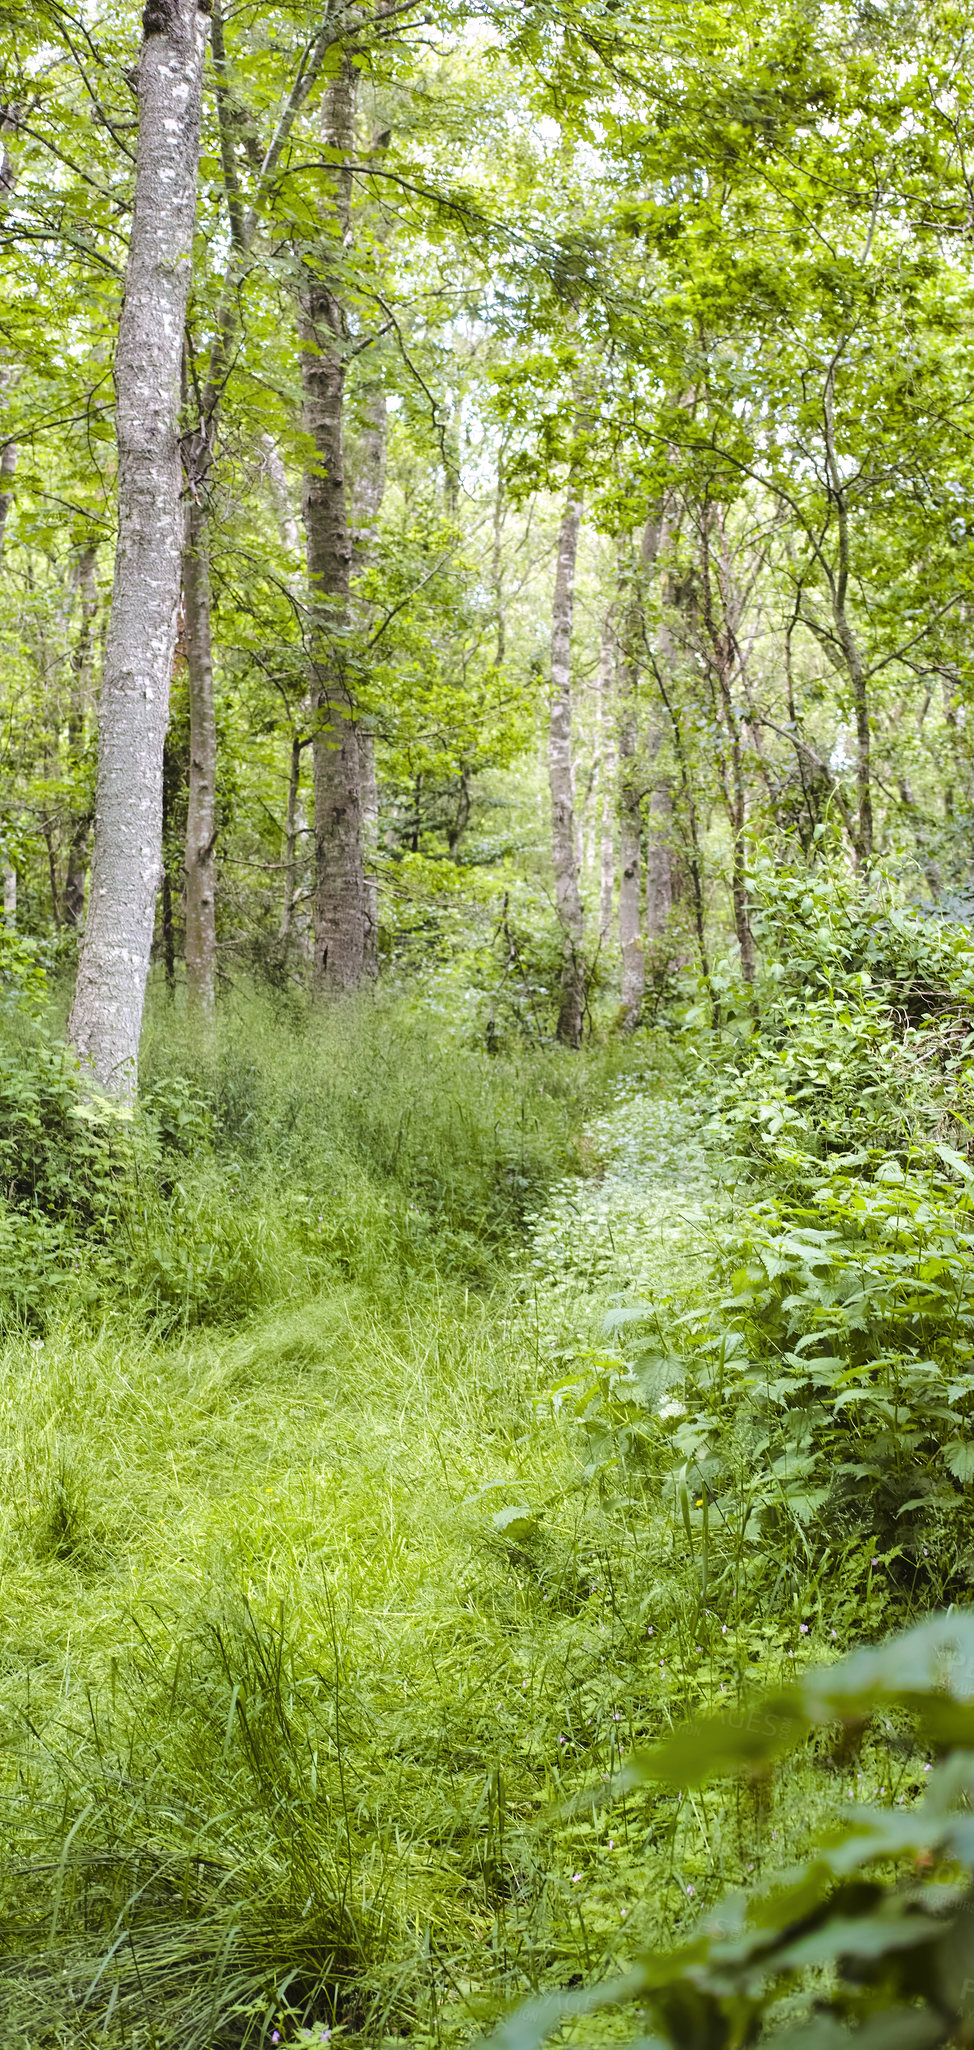 Buy stock photo Landscape view of a hardwood tree forest in summer. Deserted and secluded woodland used for adventure and walking for fun. Empty lush green grassland in a rural natural environment in nature